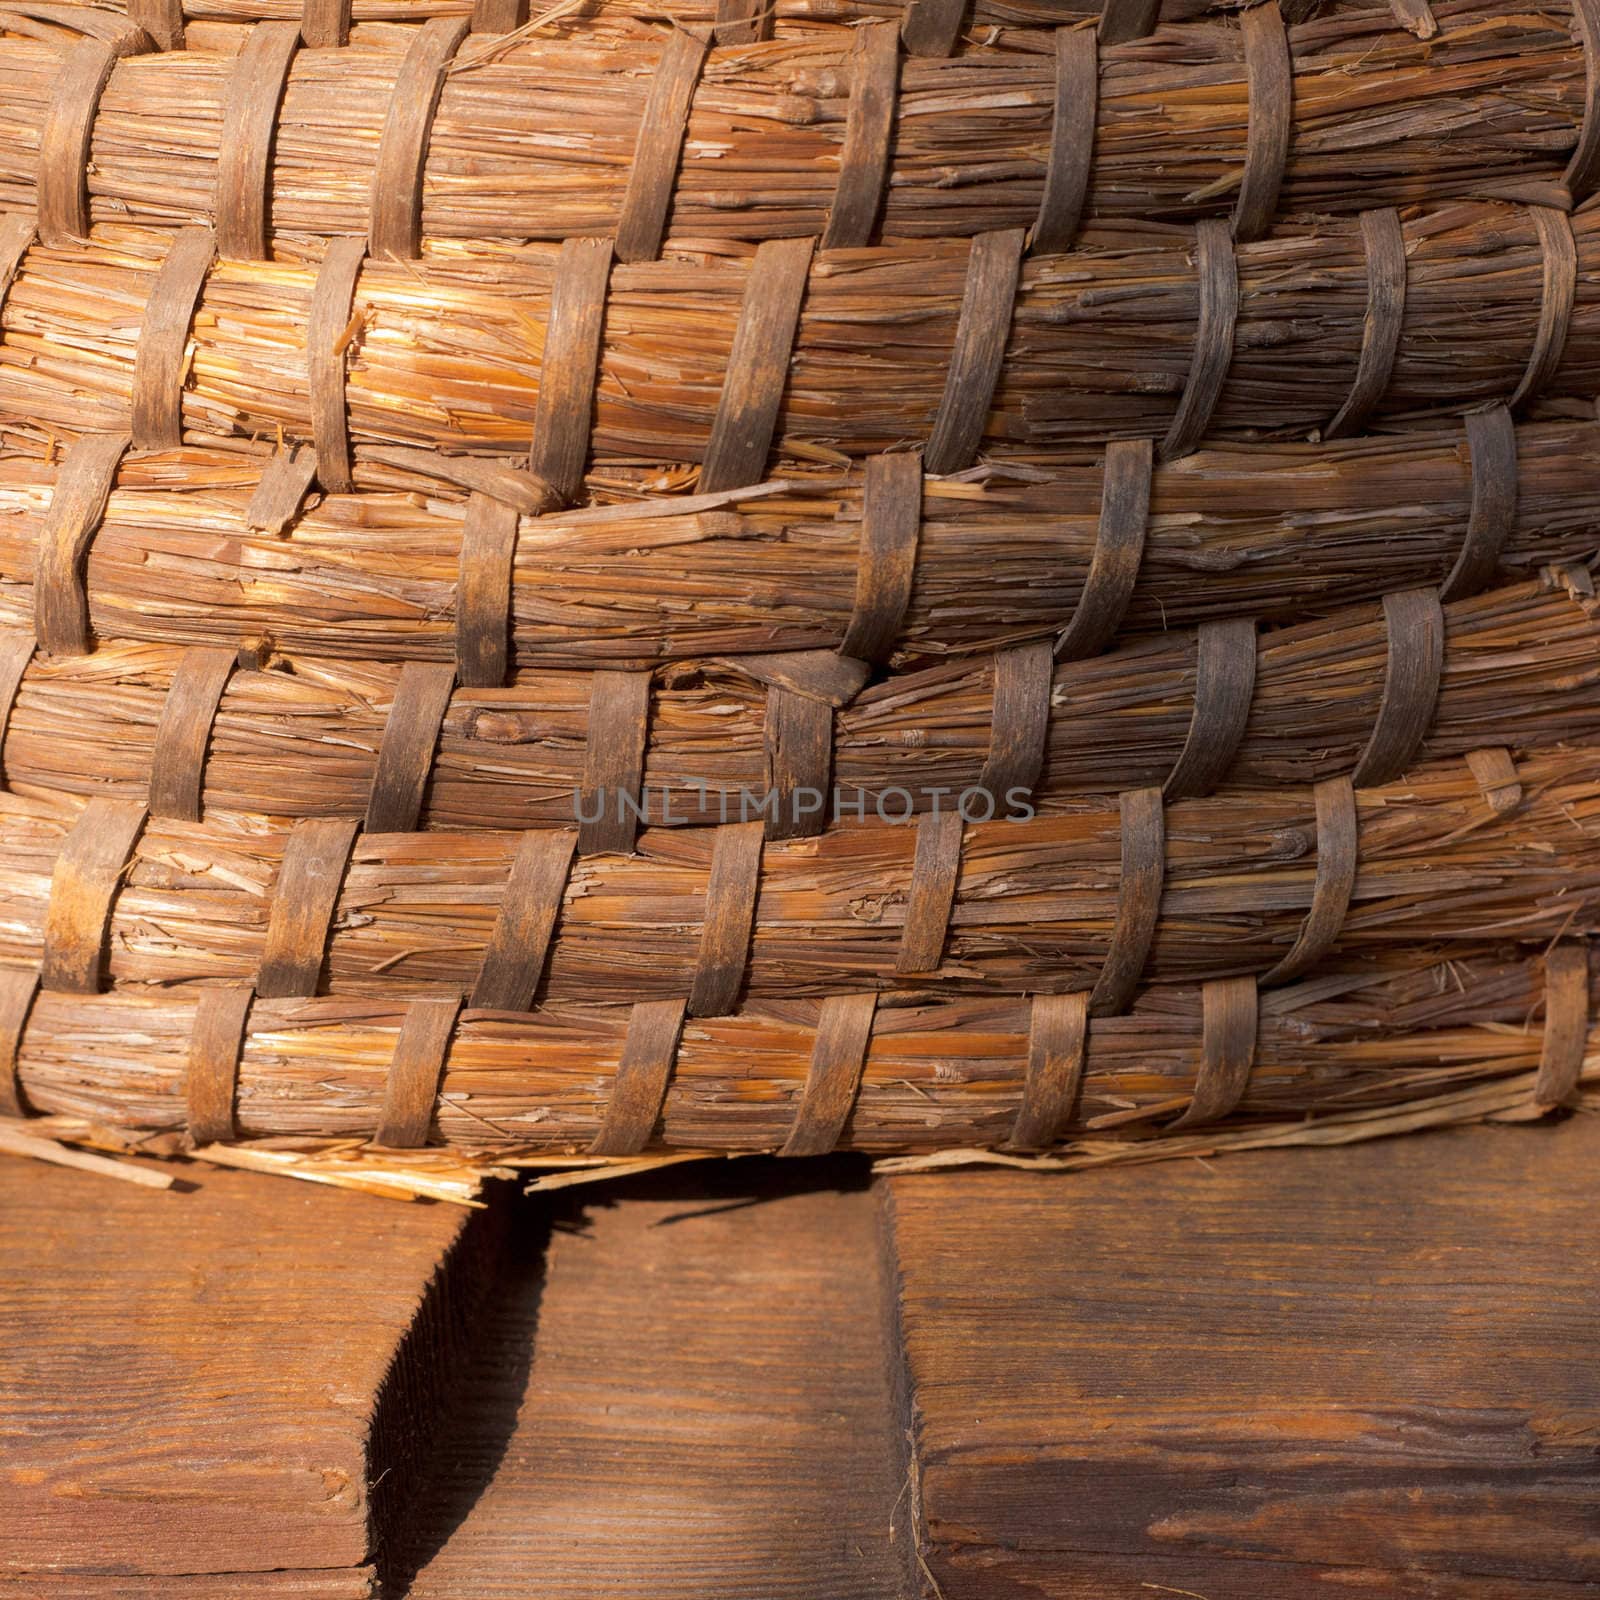 Traditional straw/ wicker woven bee hive, entrance